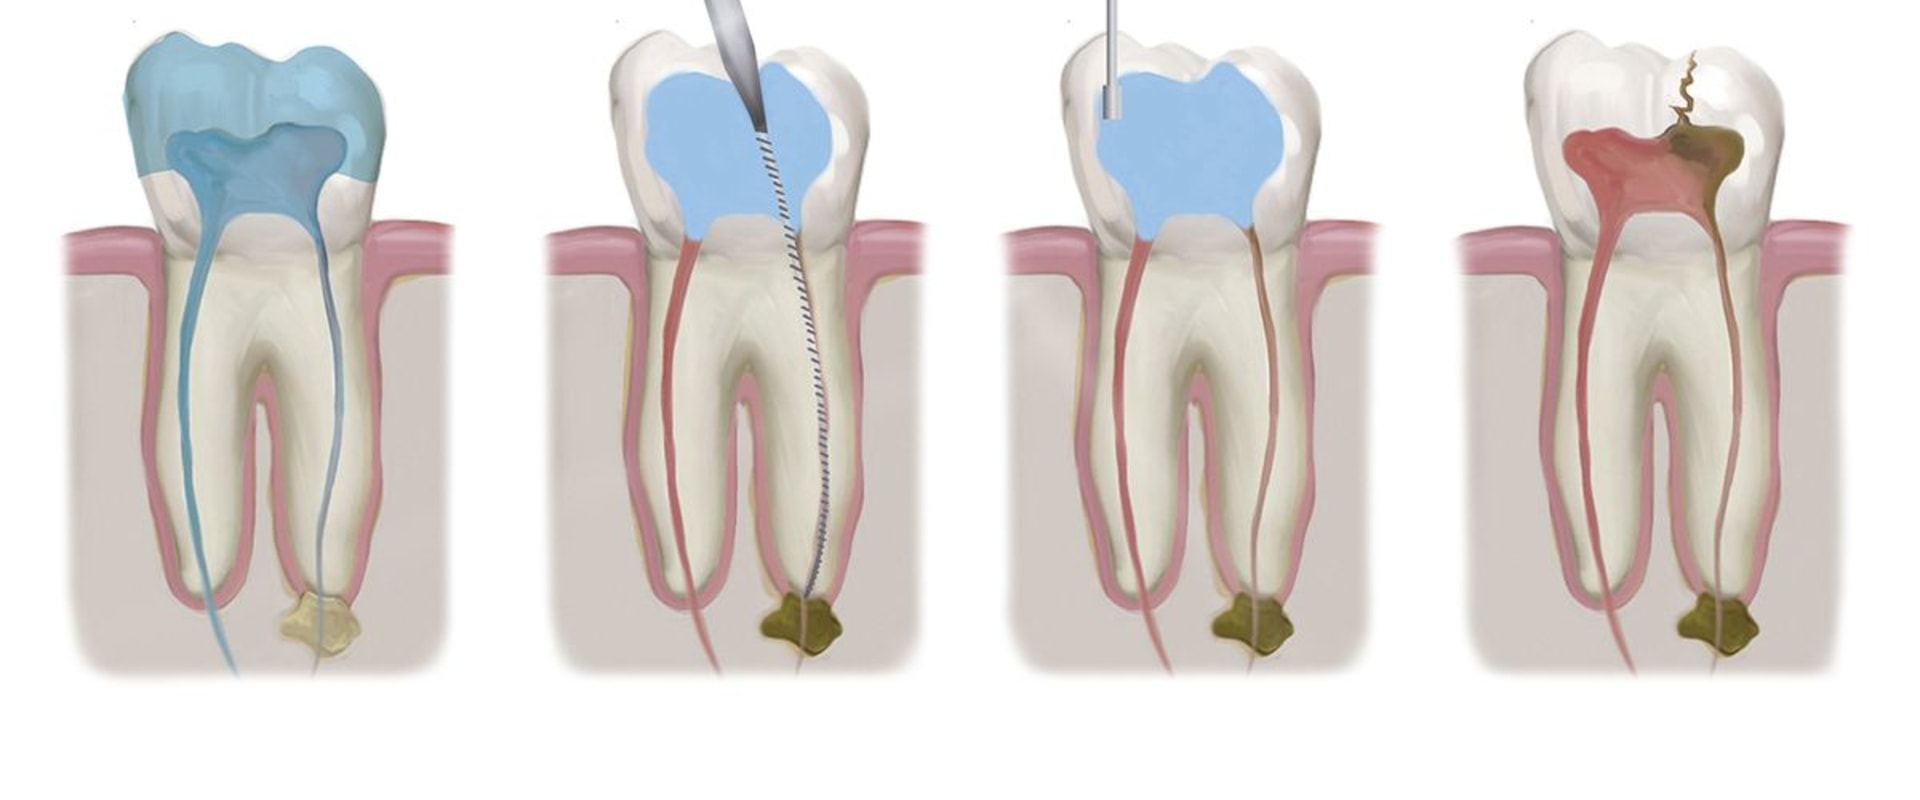 Dental Veneers And Emergency Root Canal Treatment In London: What To Expect